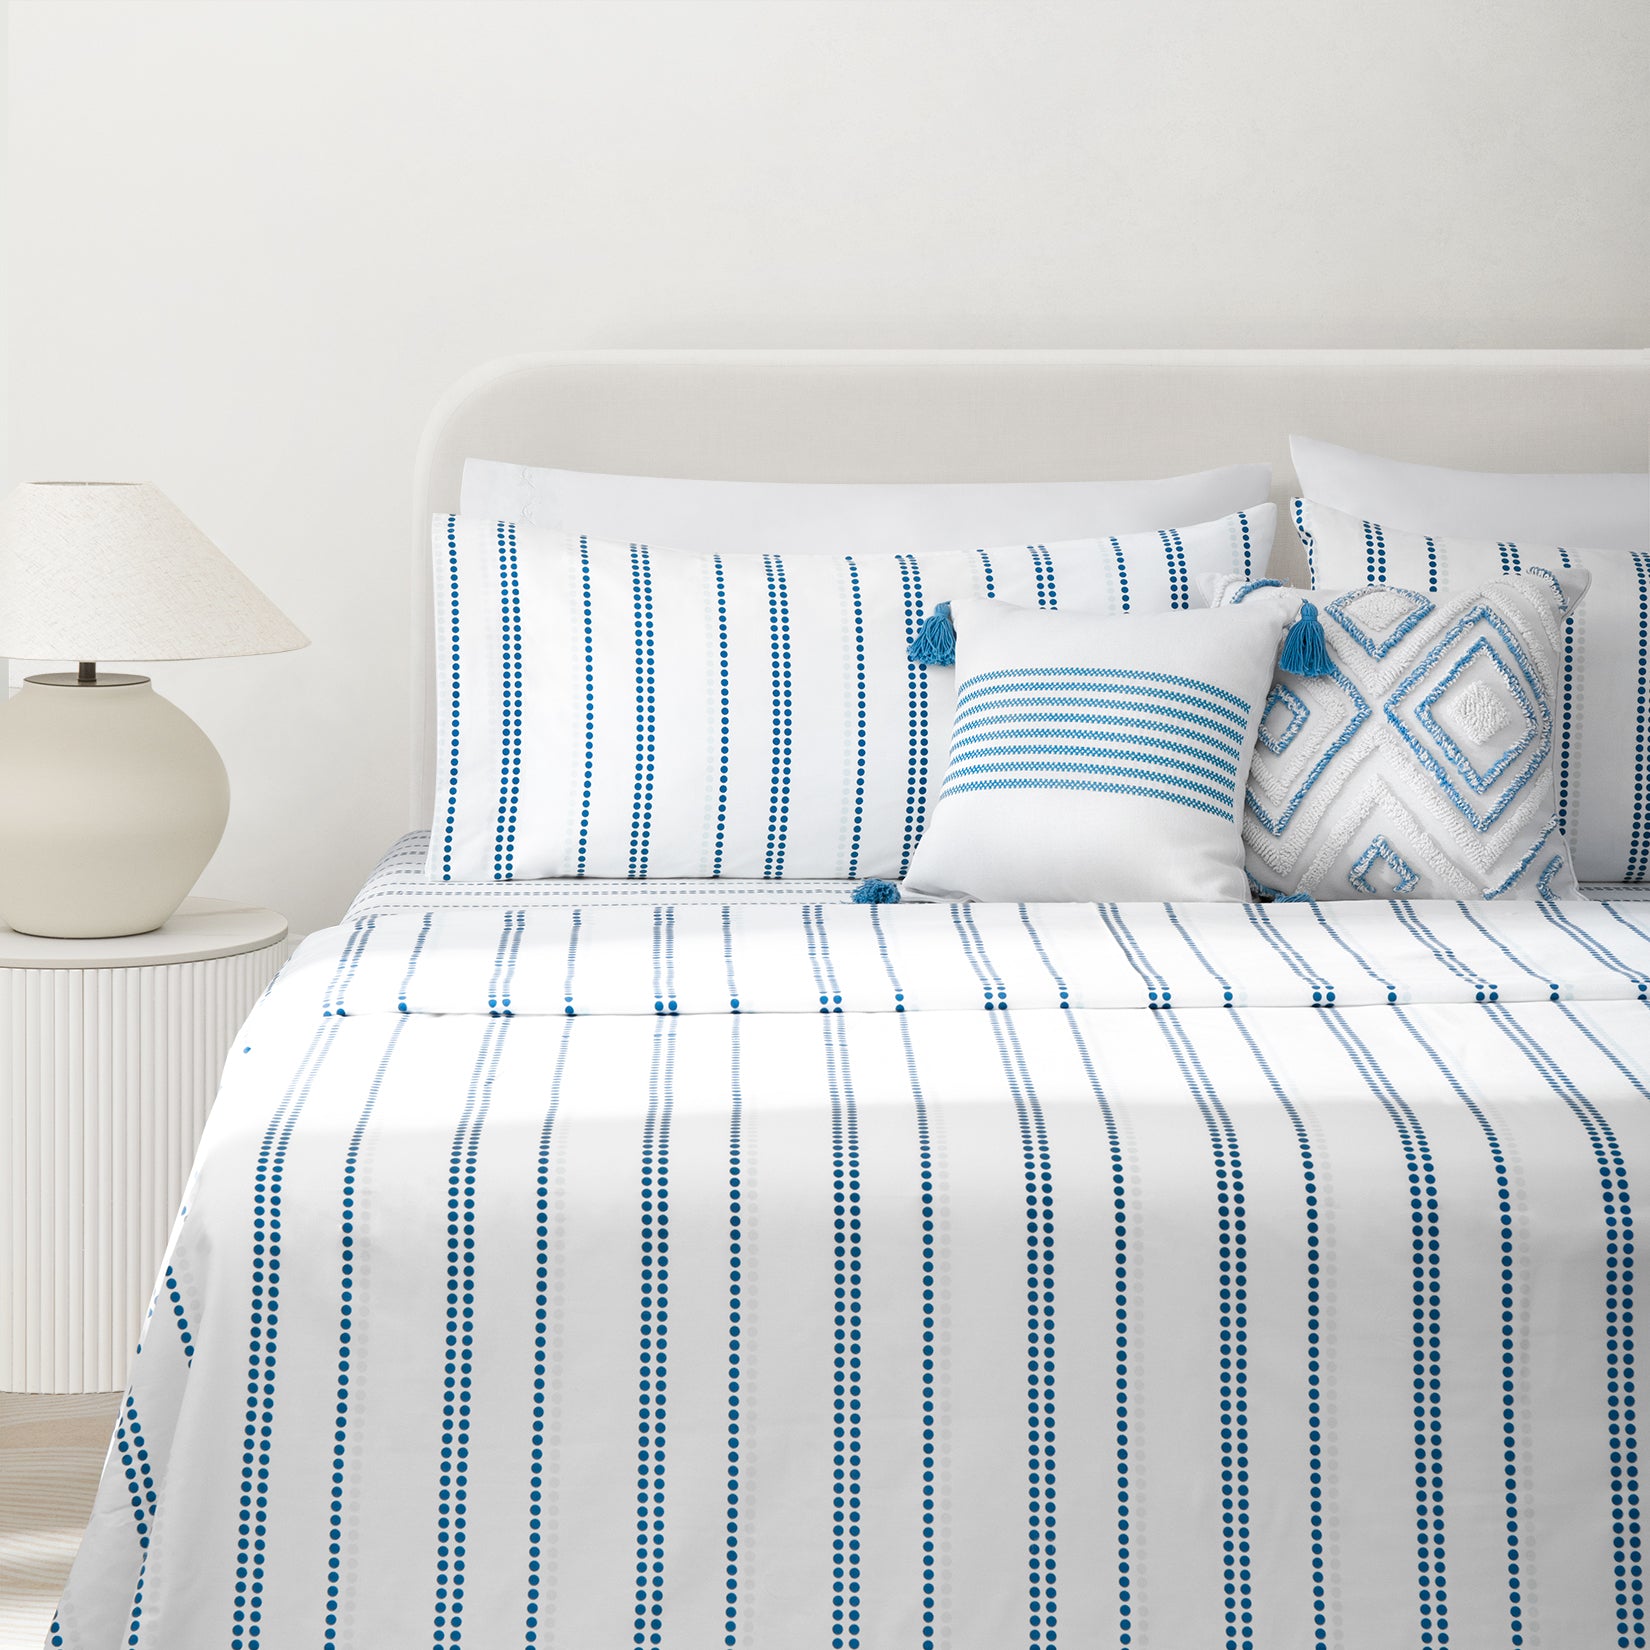 Camille Blue stripe bed sheets set. Dotted blue and white bedding set with striped accent pillow with tassles and tufted diamond accent pillow on bed and bedside lamp.